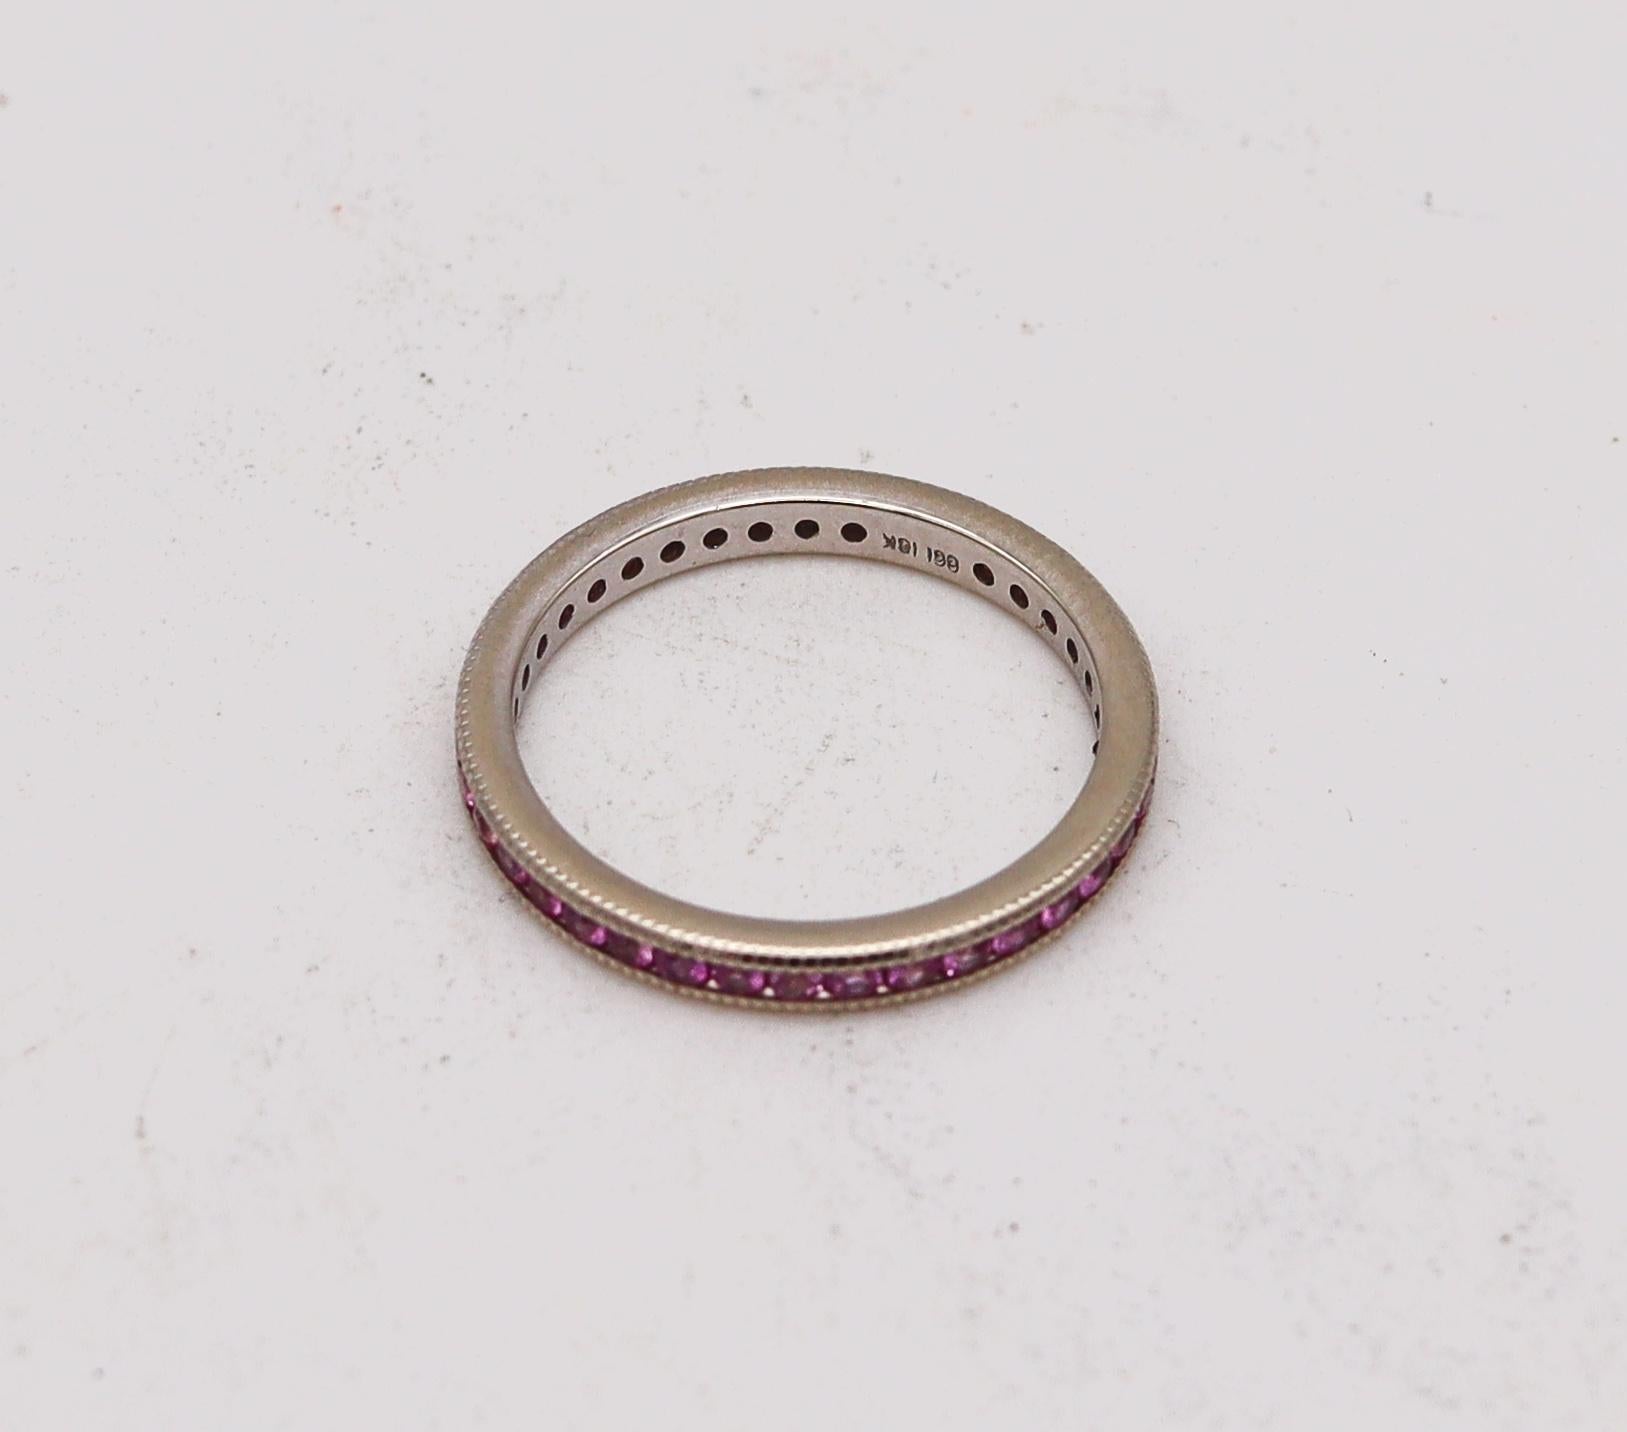 An eternity ring band with natural pink sapphires.

Contemporary eternity band ring crafted in America in solid white gold of 18 karats with high polished finish. It is mounted in a plain channel setting with 38 calibrated round brilliant cuts of